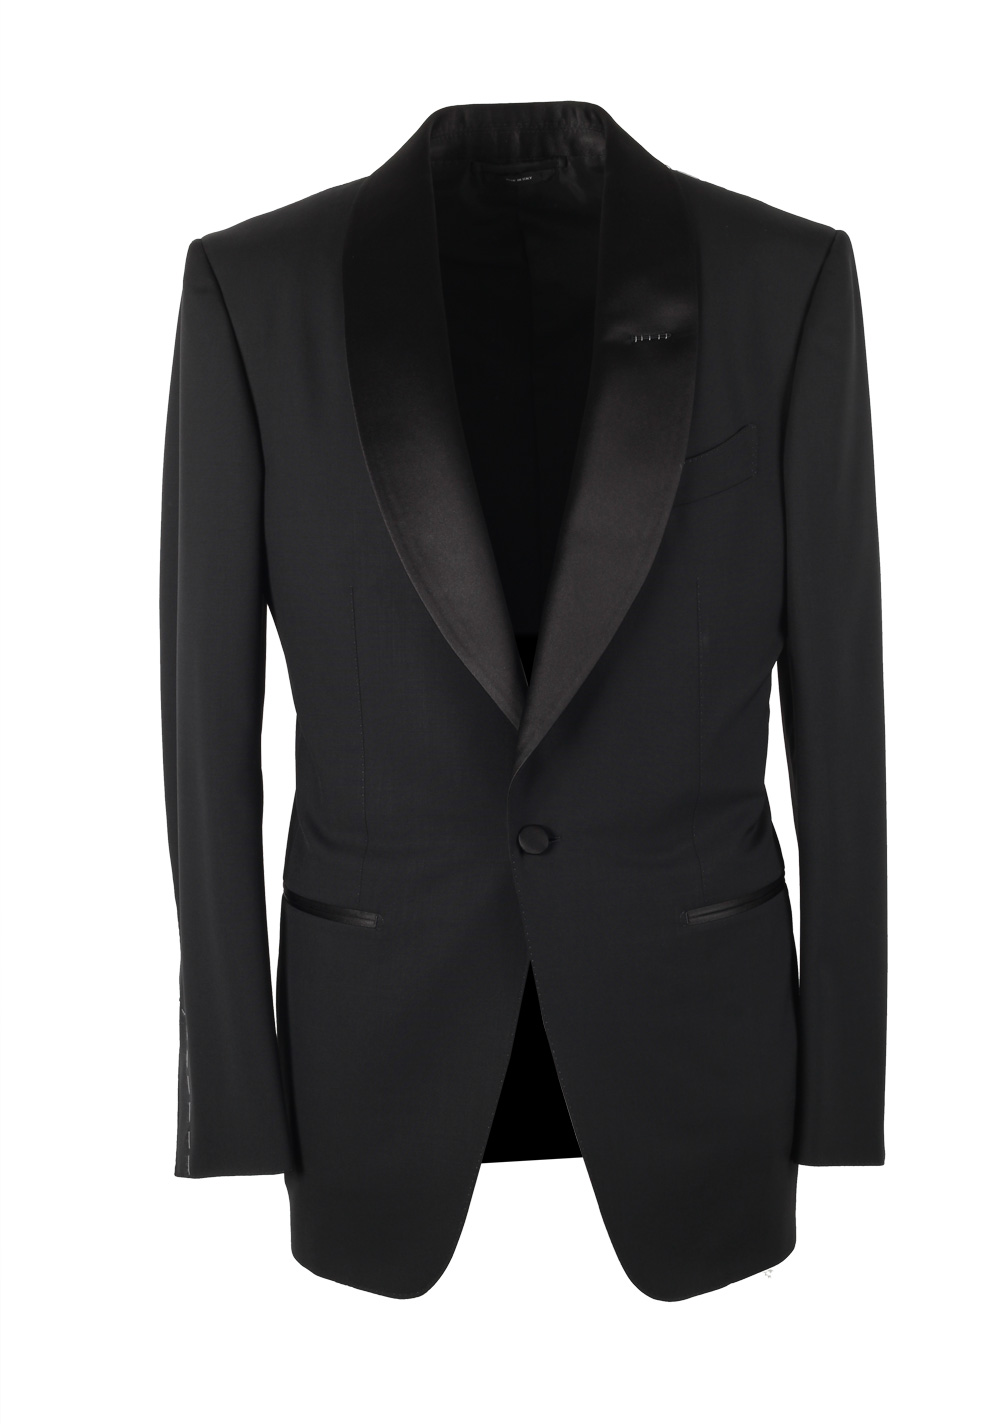 TOM FORD Windsor Black Tuxedo Smoking Suit Size 46 / 36R U.S. Fit A ...